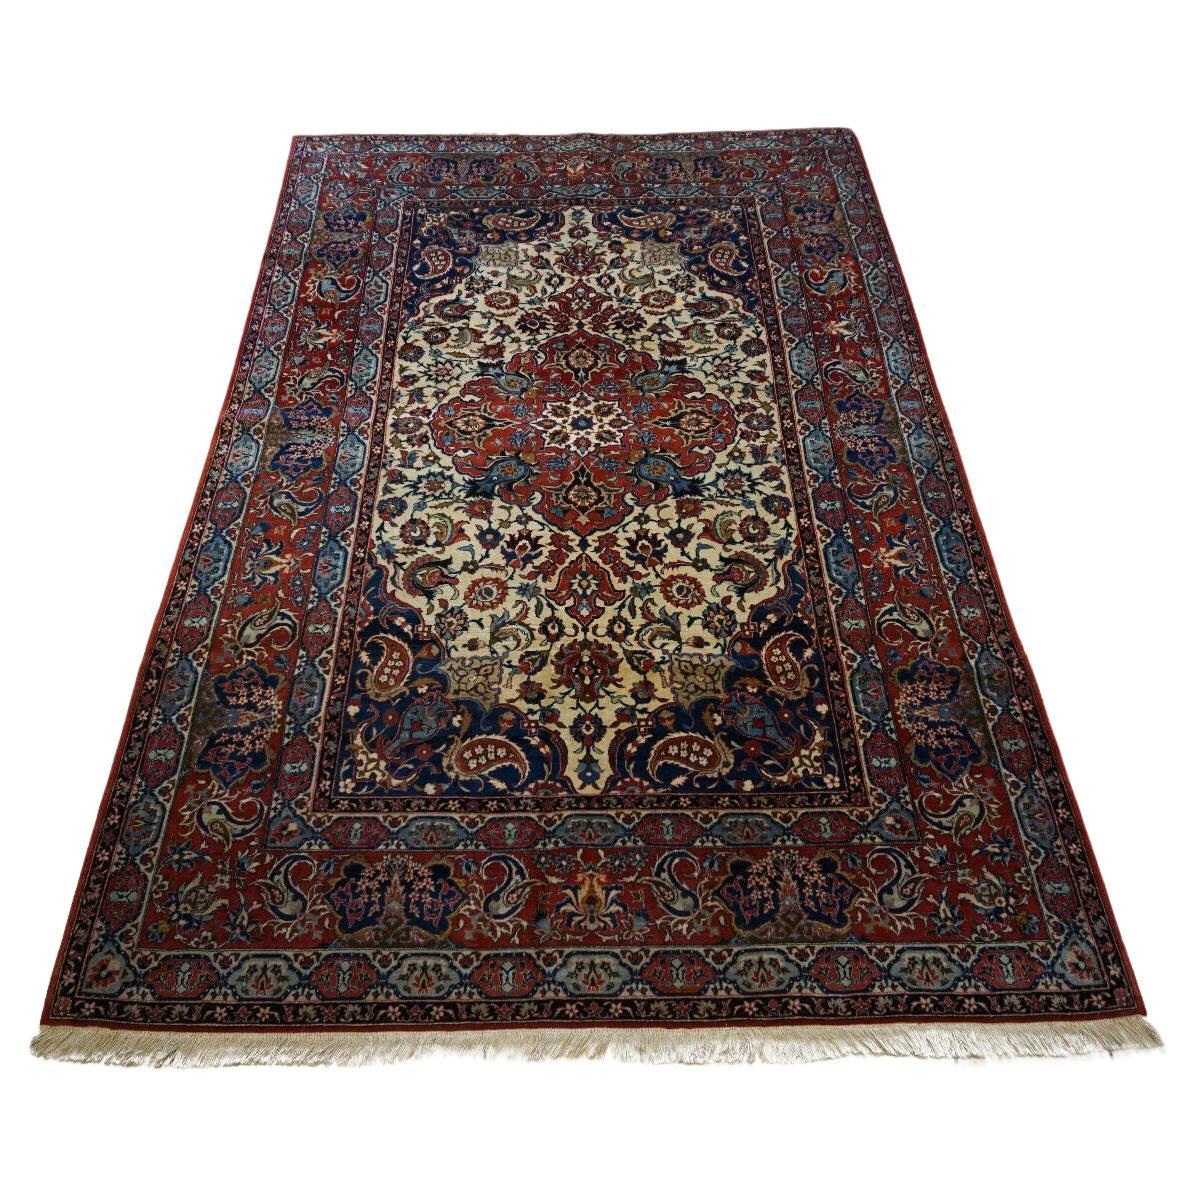 Handmade Antique Persian Style Isfahan Rug 4.5' x 7.7', 1920s - 1D53 For Sale